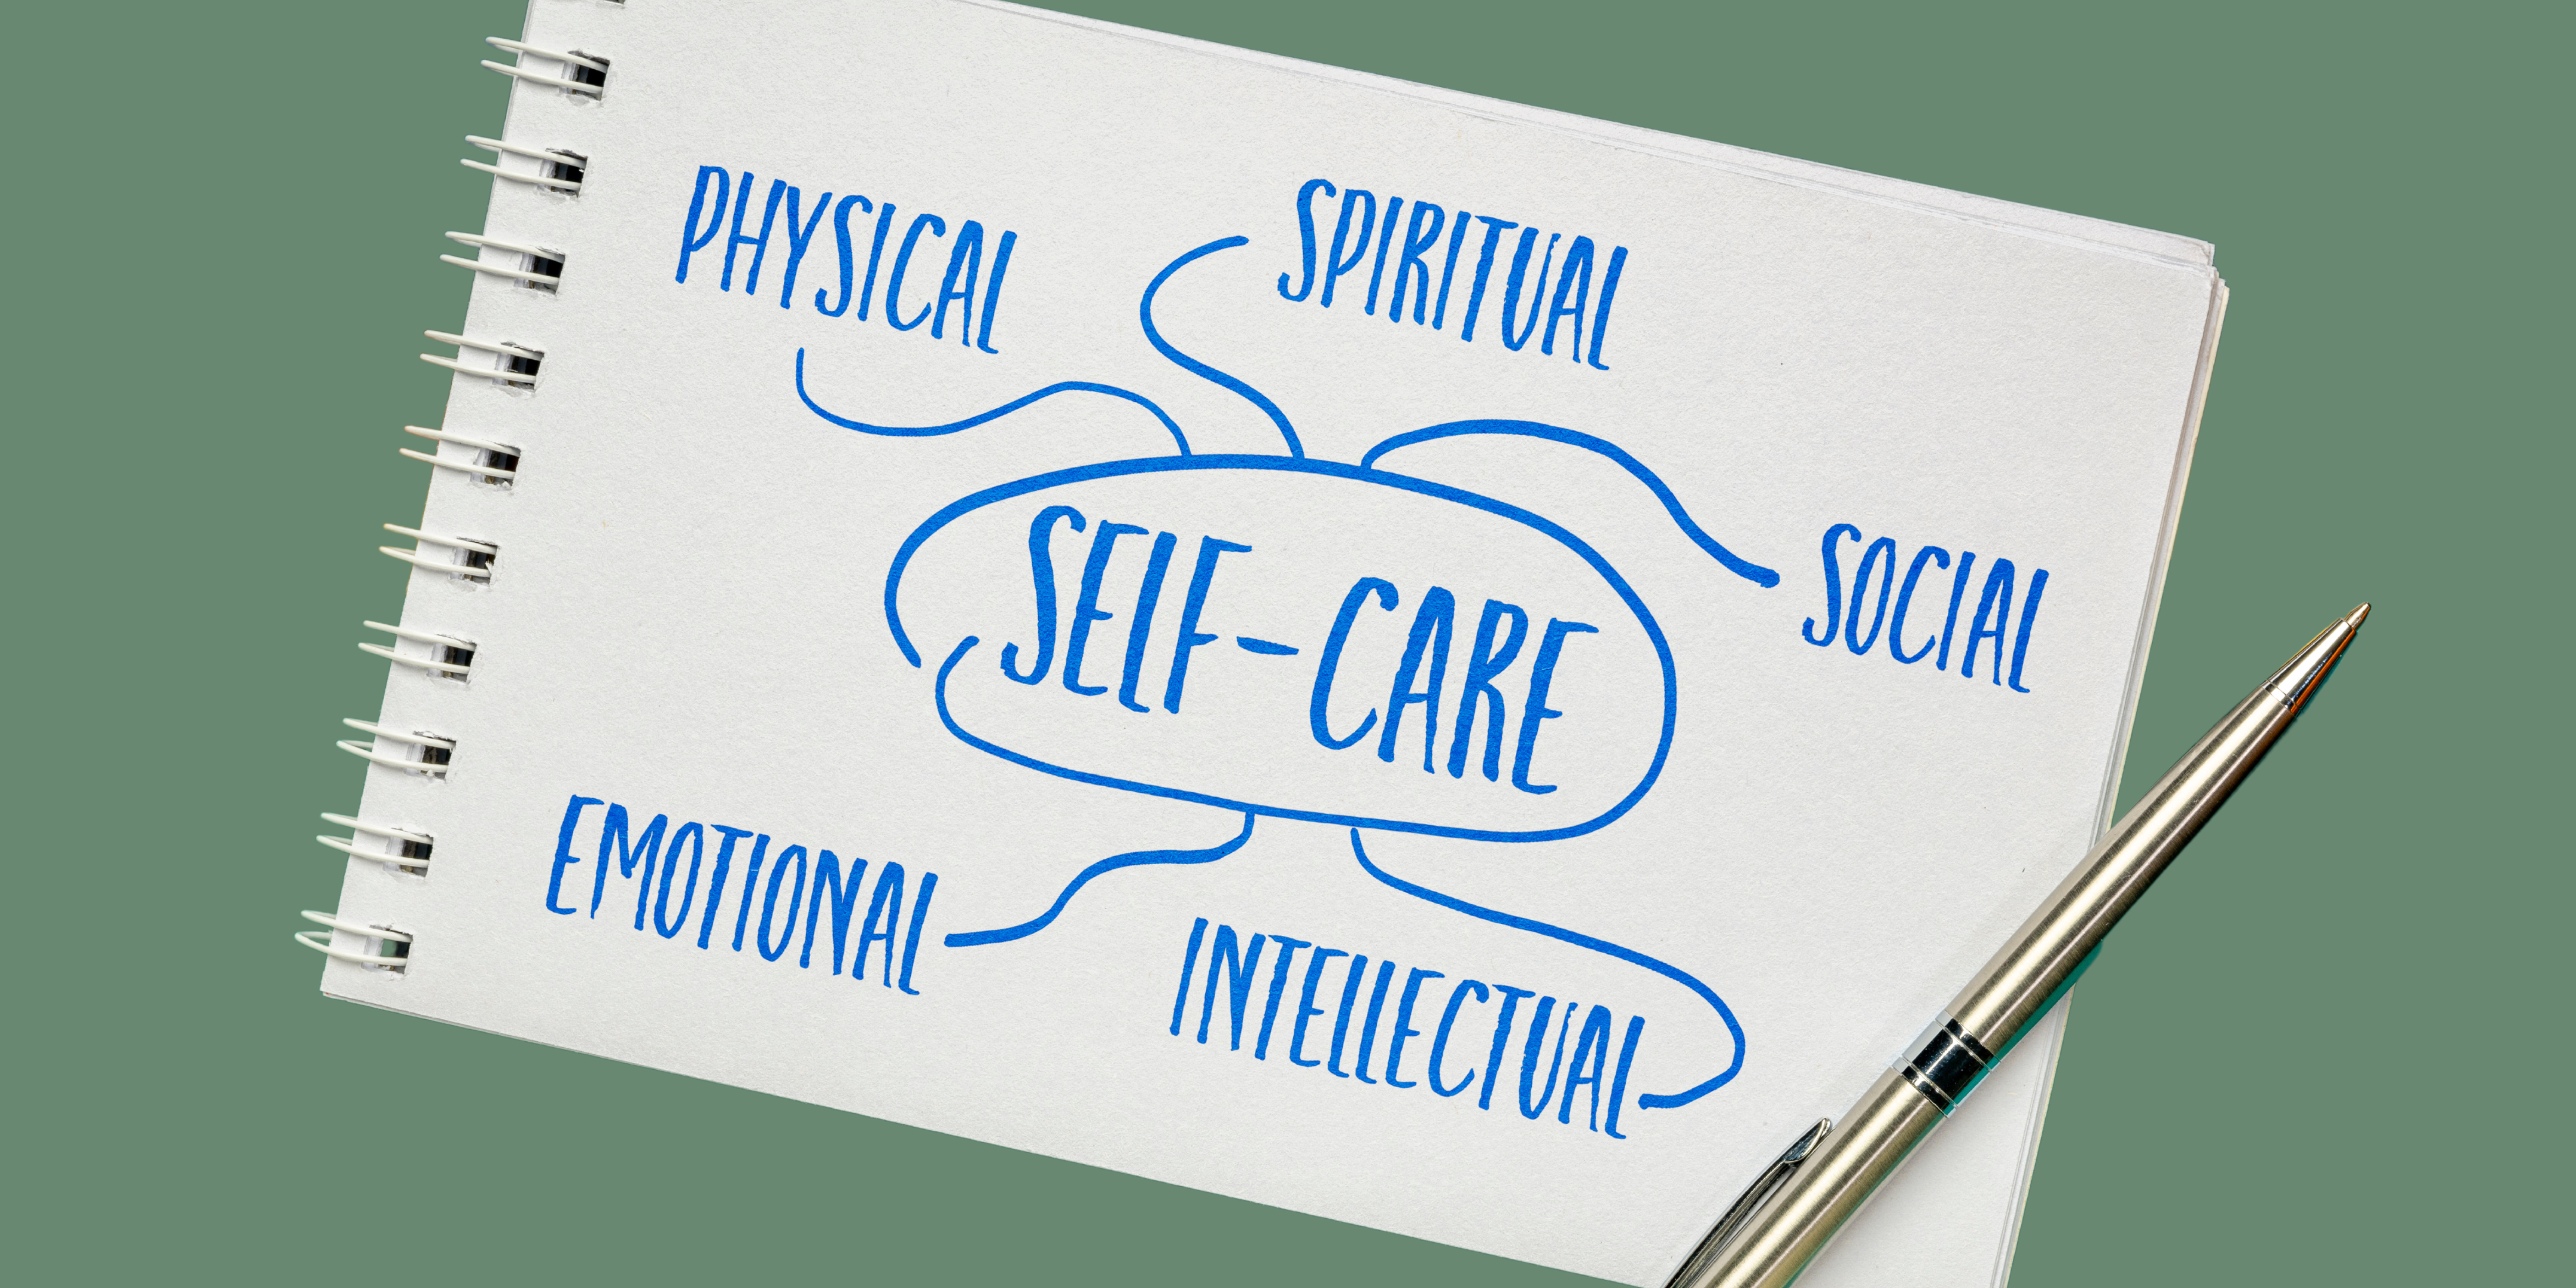 values-guided self care